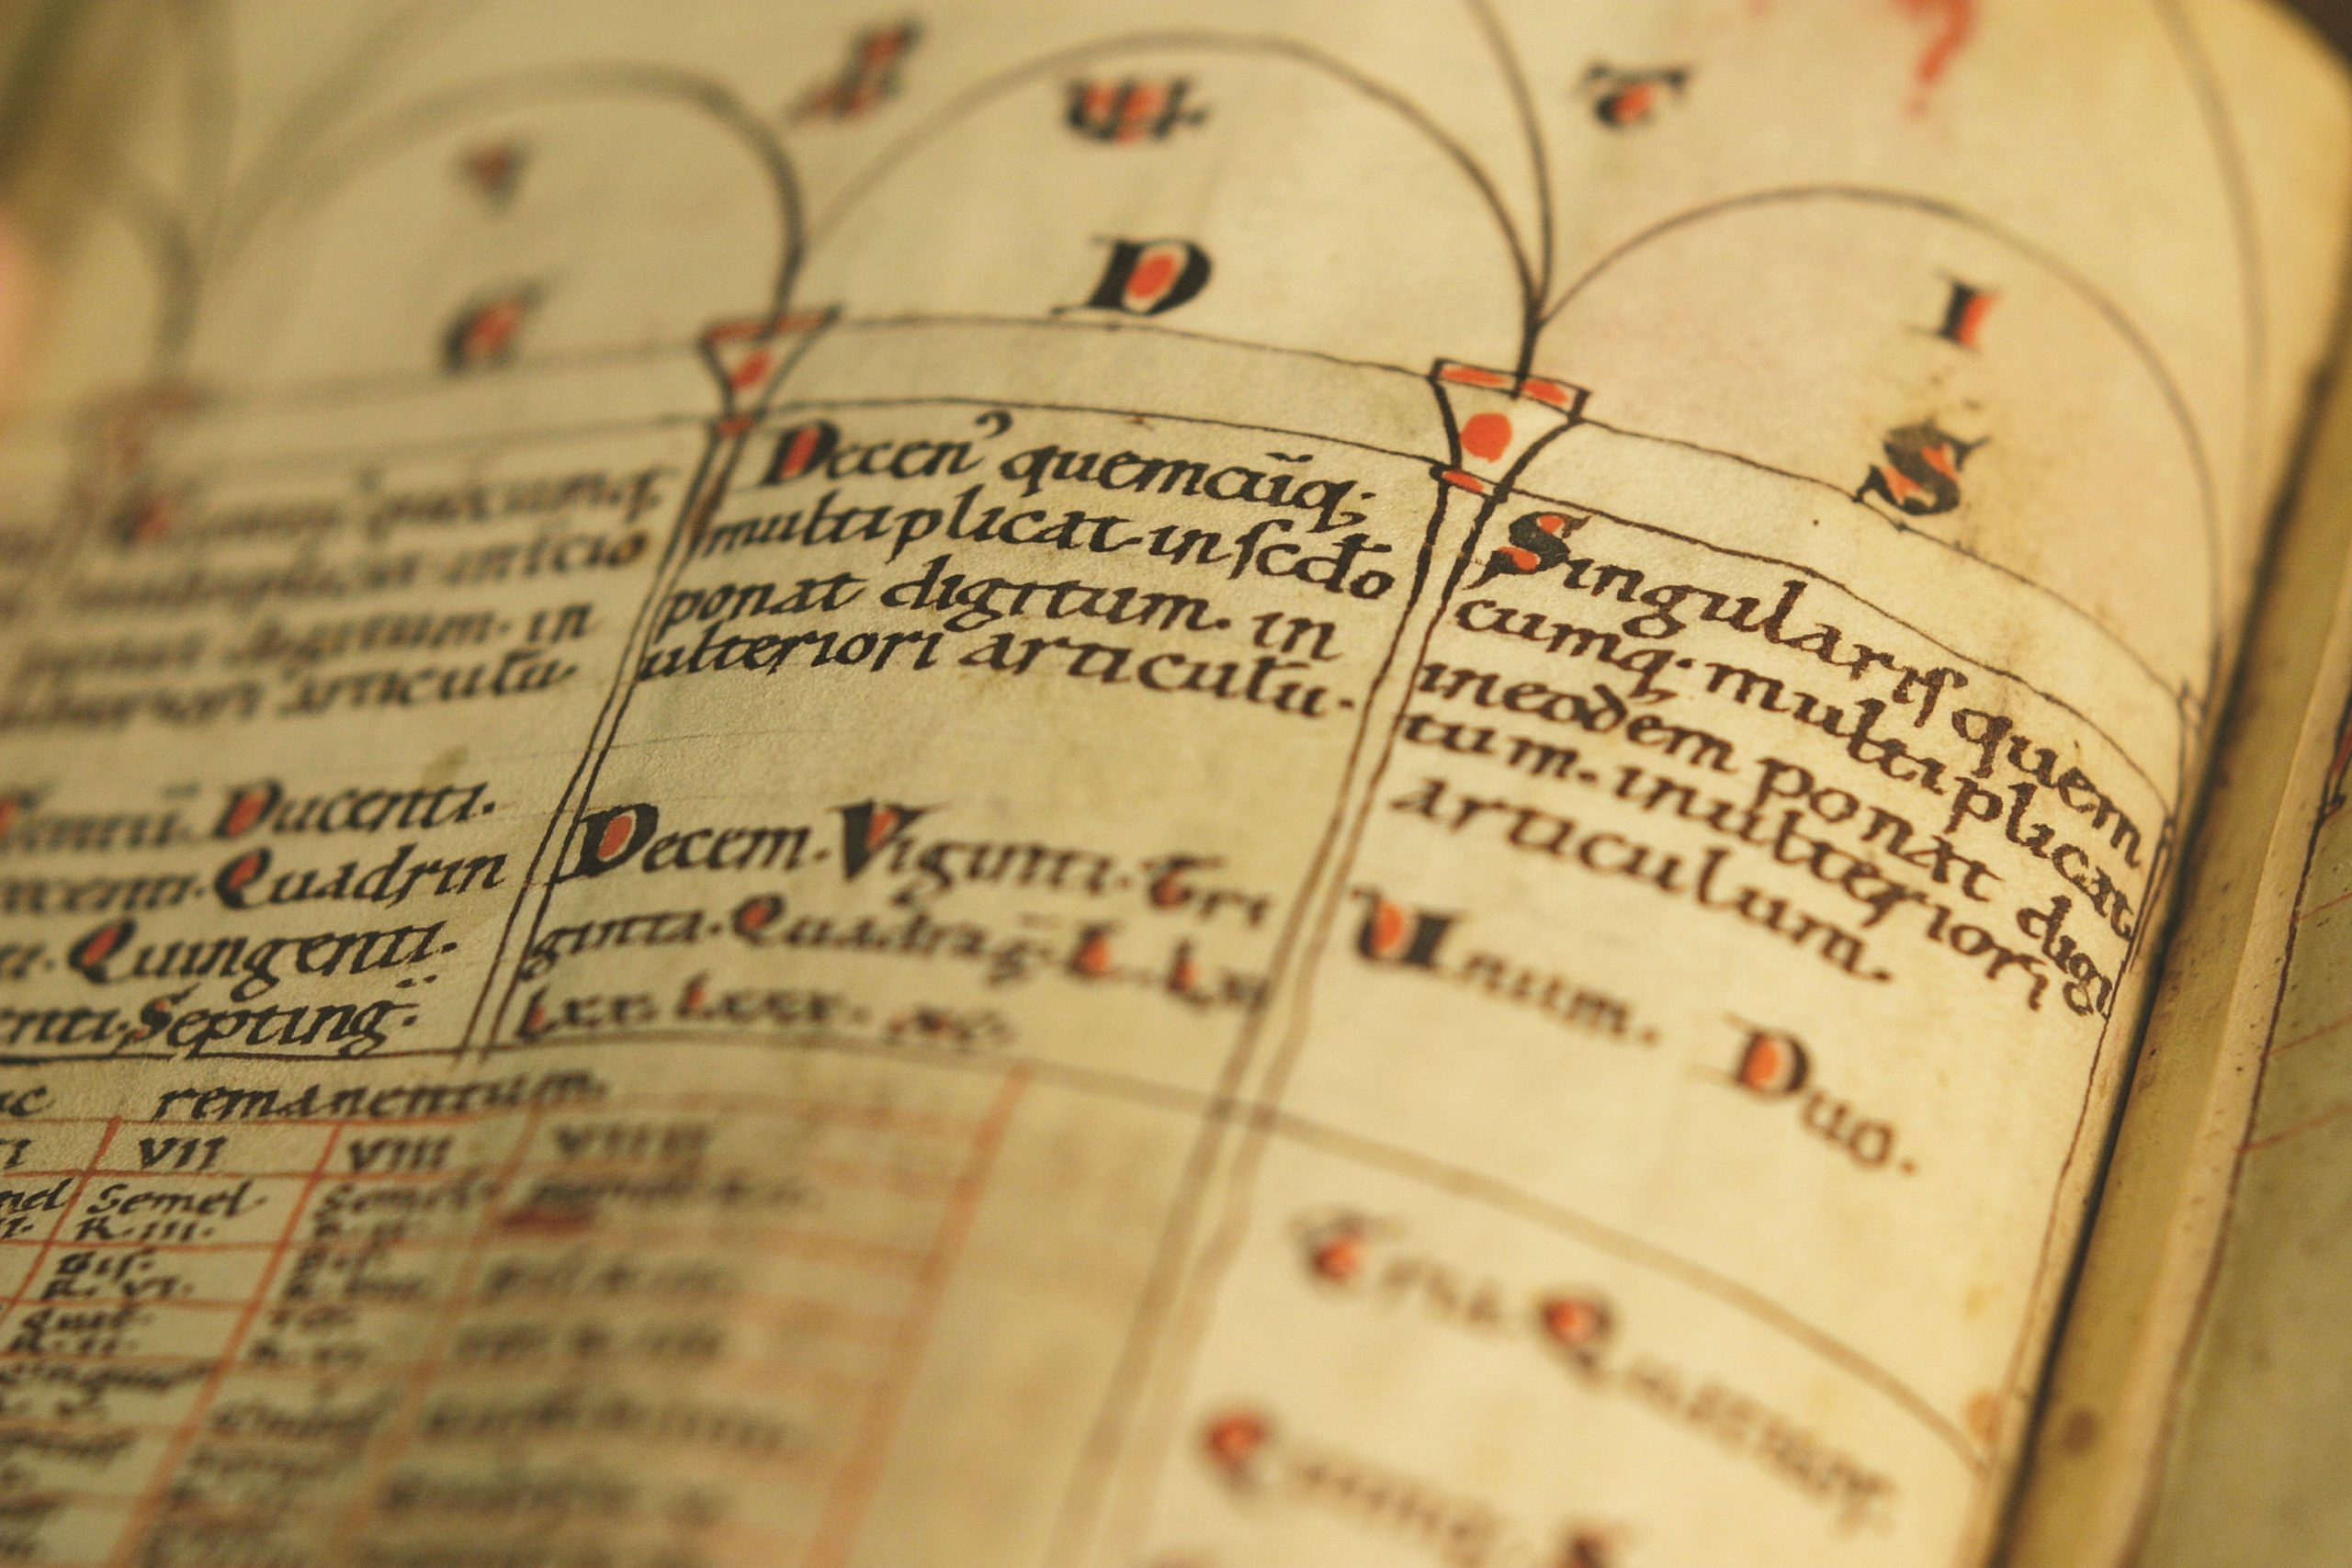 Sibley’s Oldest Treasure: The Rochester Codex (ca. 1070–1103)